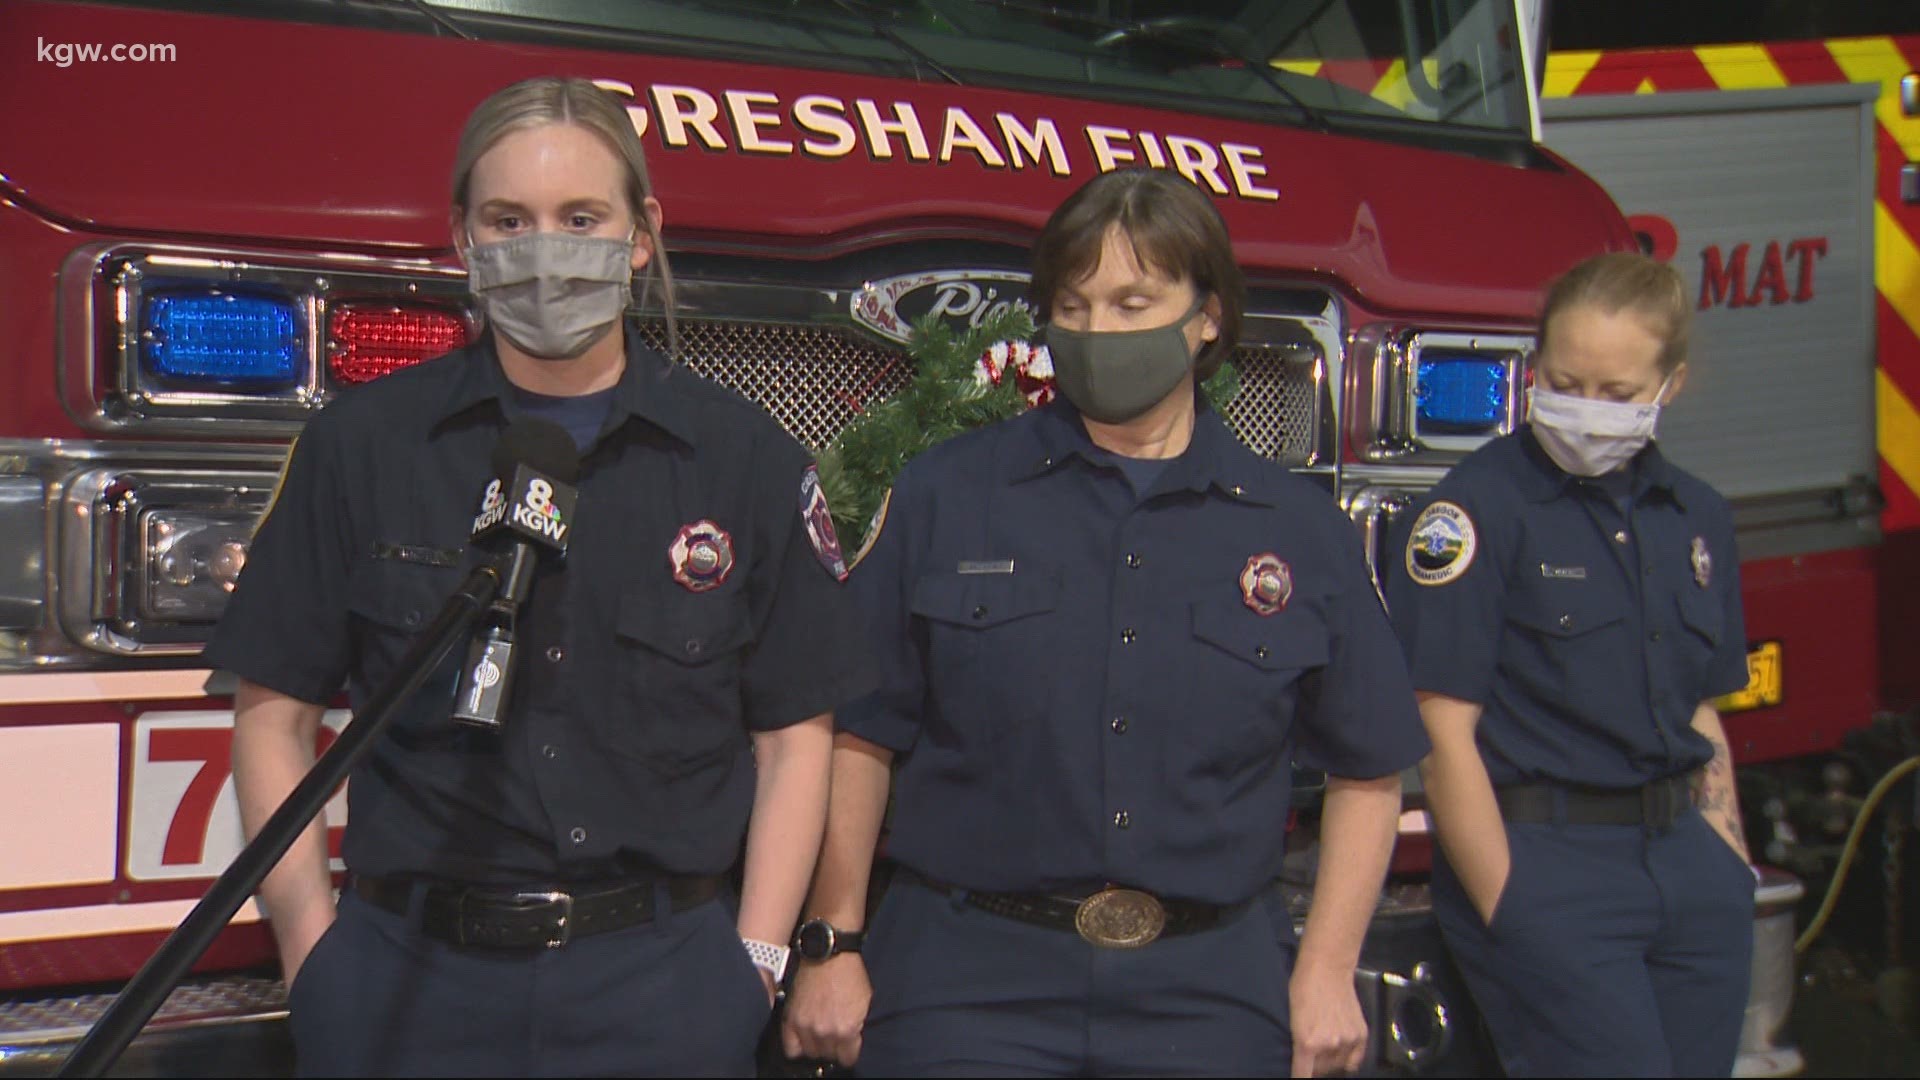 Battalion Chief of Gresham fire Jason McGowan said he wants their department to lead the charge in hiring more women firefighters in a male-dominated industry.